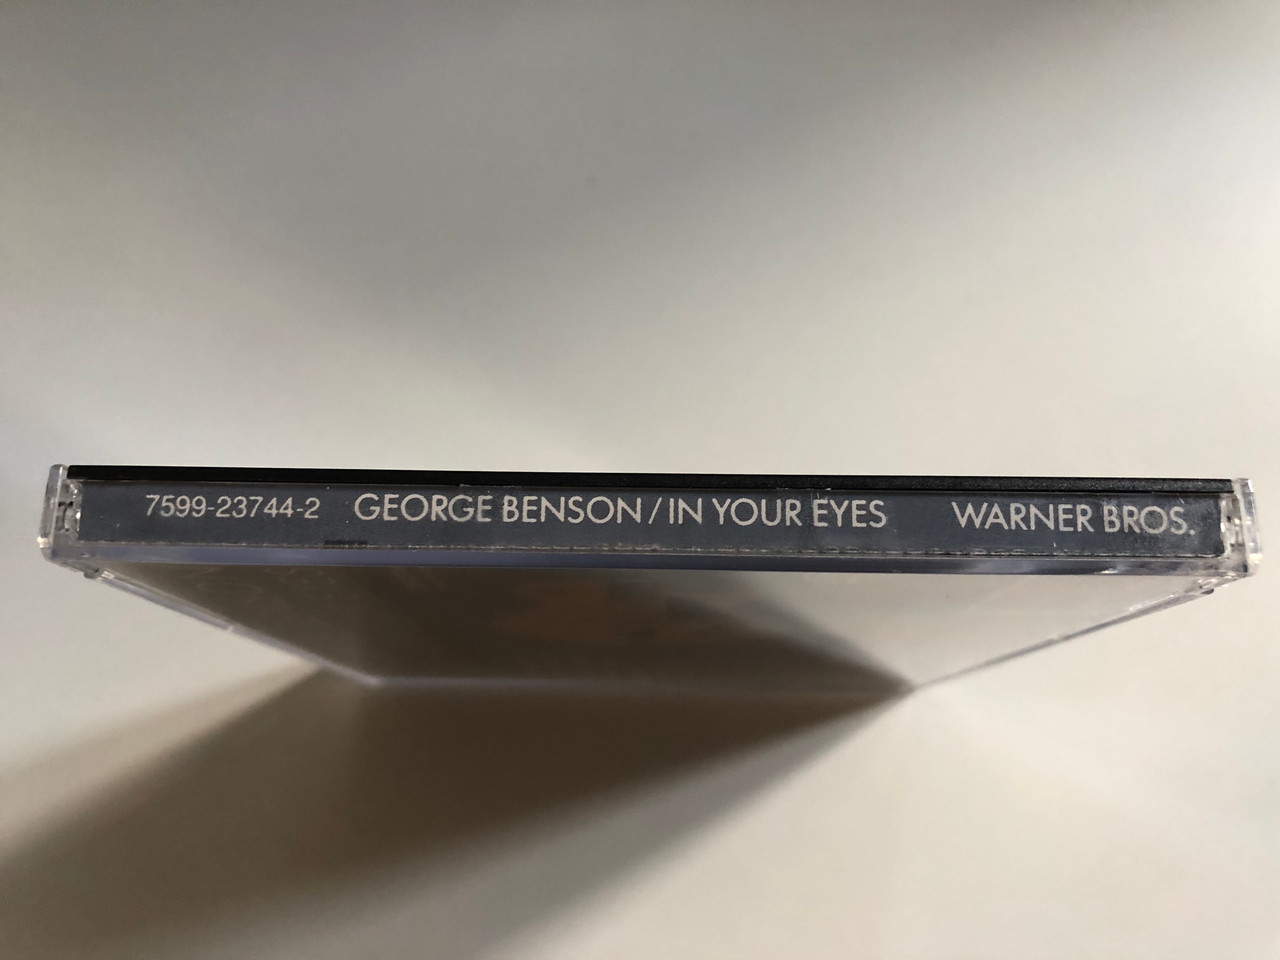 https://cdn10.bigcommerce.com/s-62bdpkt7pb/products/0/images/313486/George_Benson_In_Your_Eyes_Warner_Bros._Records_Audio_CD_7599-23744-2_3__01001.1700844358.1280.1280.JPG?c=2